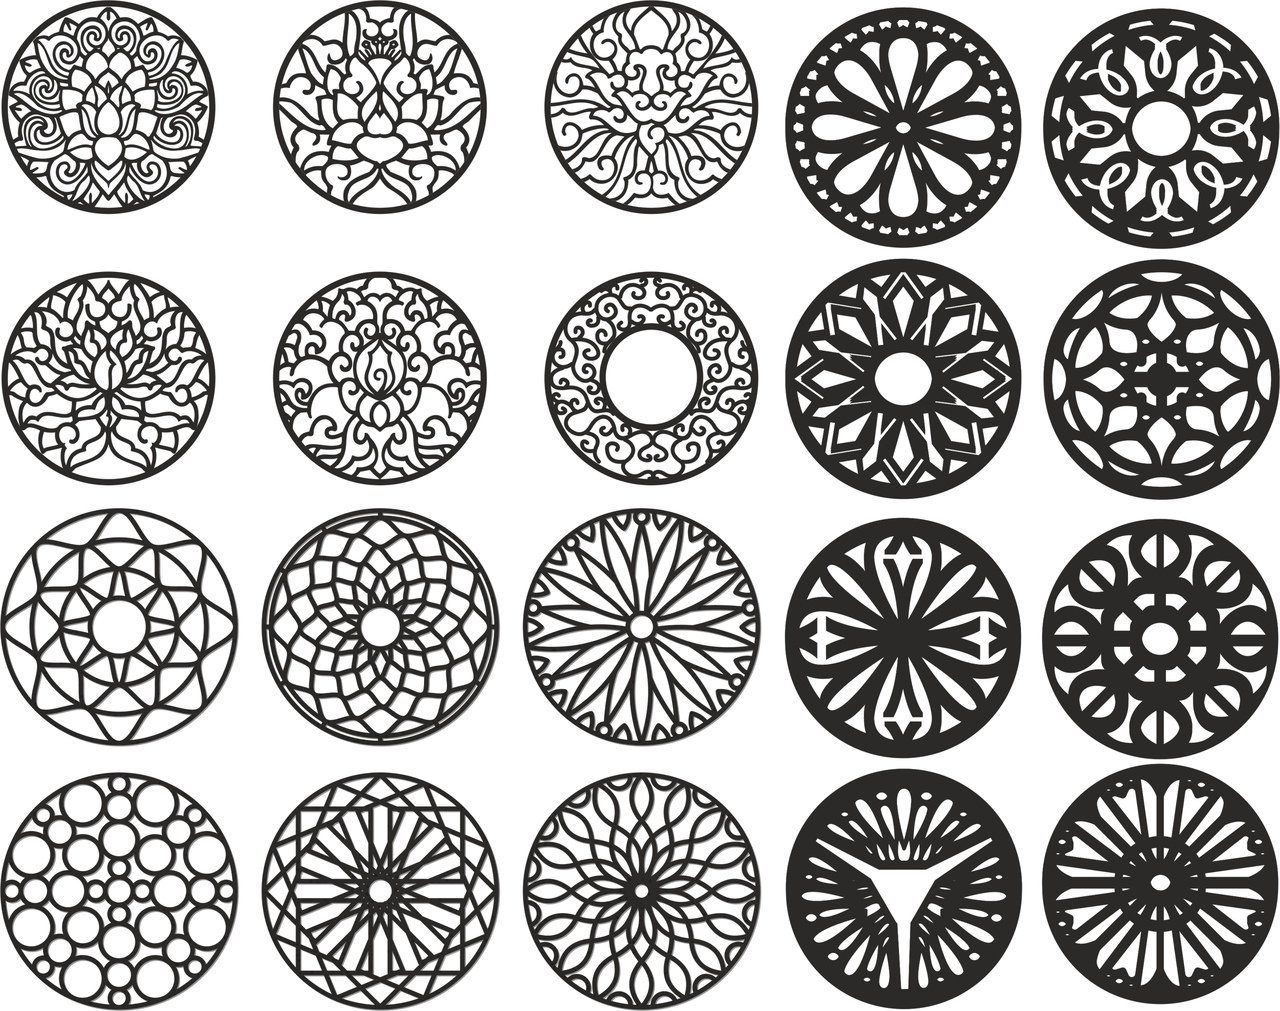 free vector patterns download